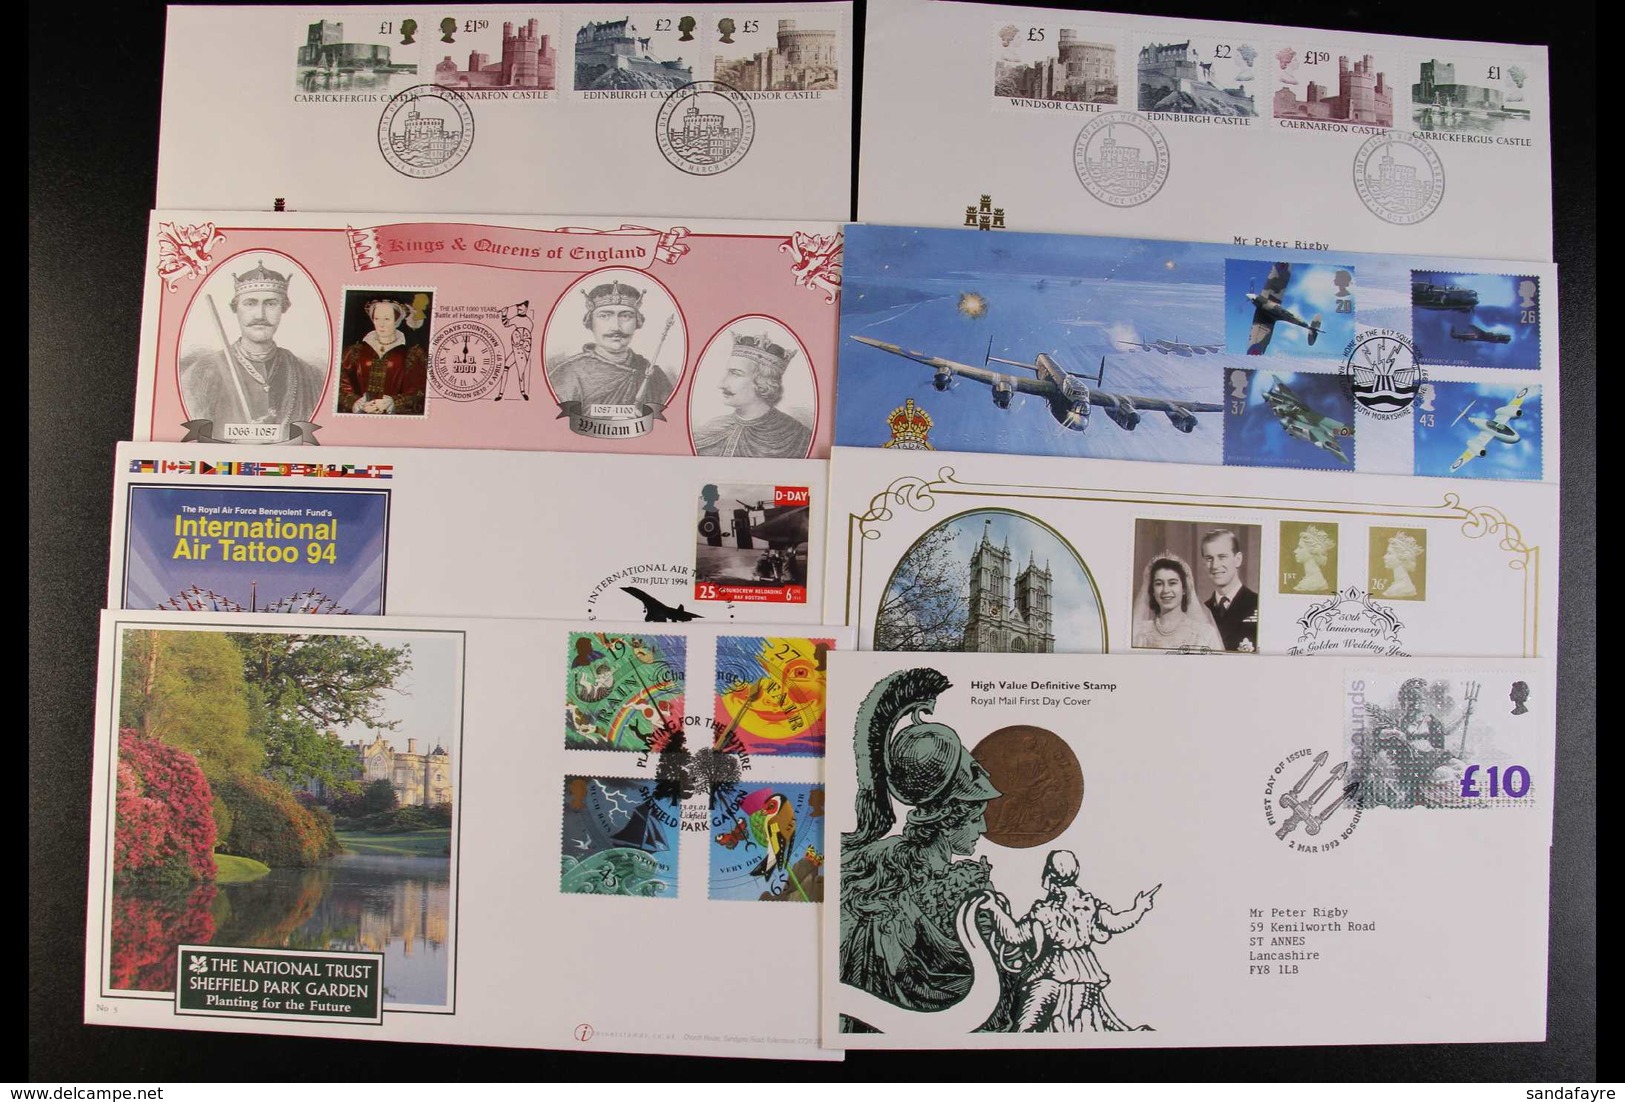 1971-2012 LOVELY EXTENSIVE COLLECTION. A Mammoth Collection Of "Decimal" Commemorative Issues On Illustrated Covers, Mos - FDC